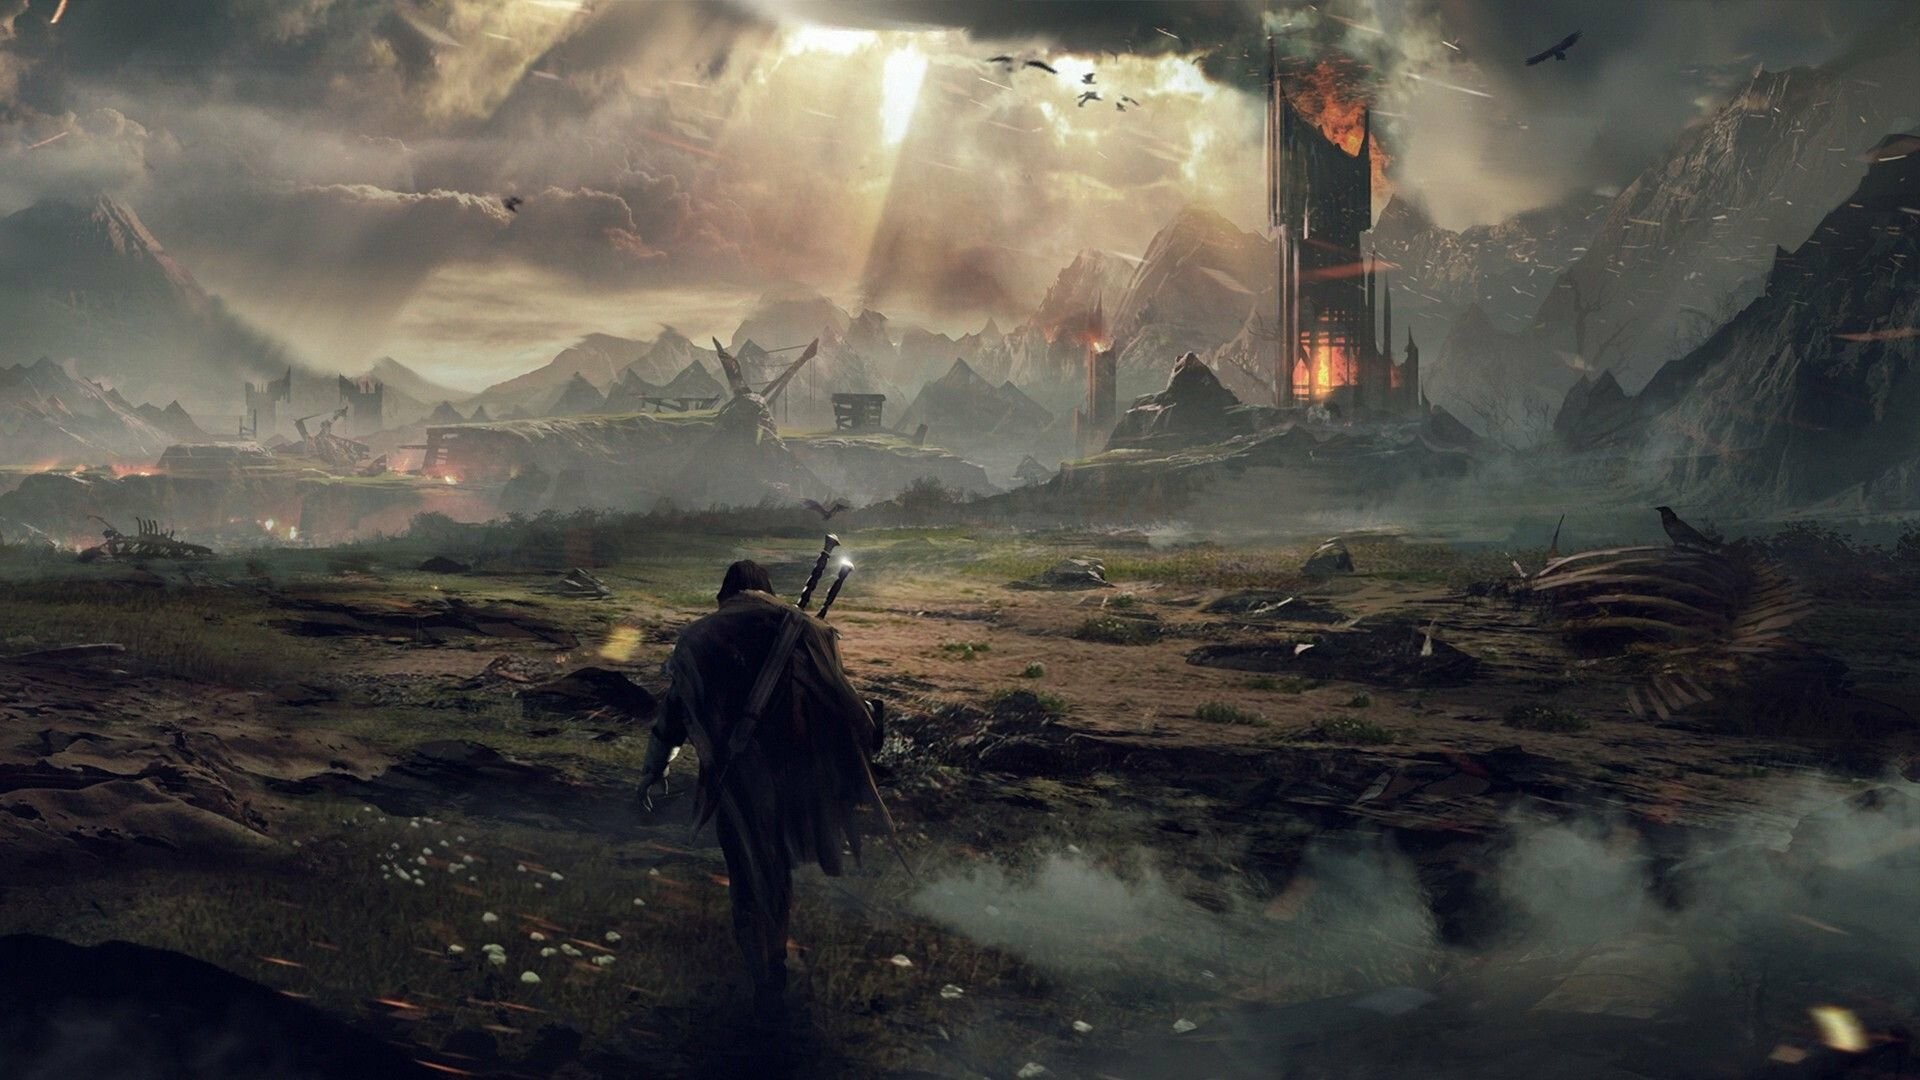 The Lord of the Rings: Middle-earth: Shadow of Mordor, A 2014 action-adventure video game developed by Monolith Productions. 1920x1080 Full HD Wallpaper.